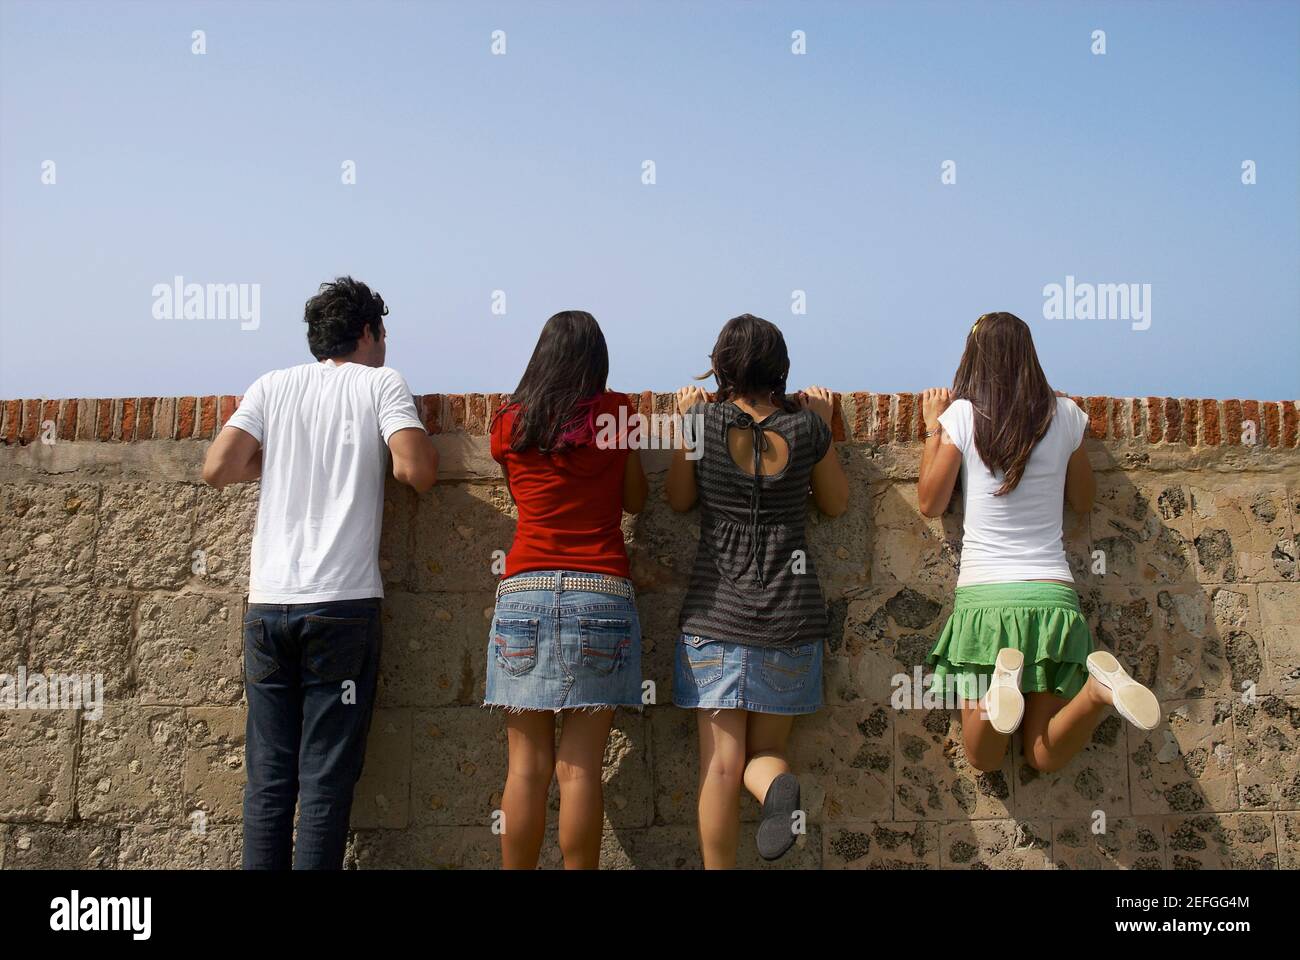 Rear view of three young women and a young man looking over a stone wall, Morro Castle, Old San Juan, San Juan, Puerto Rico Stock Photo